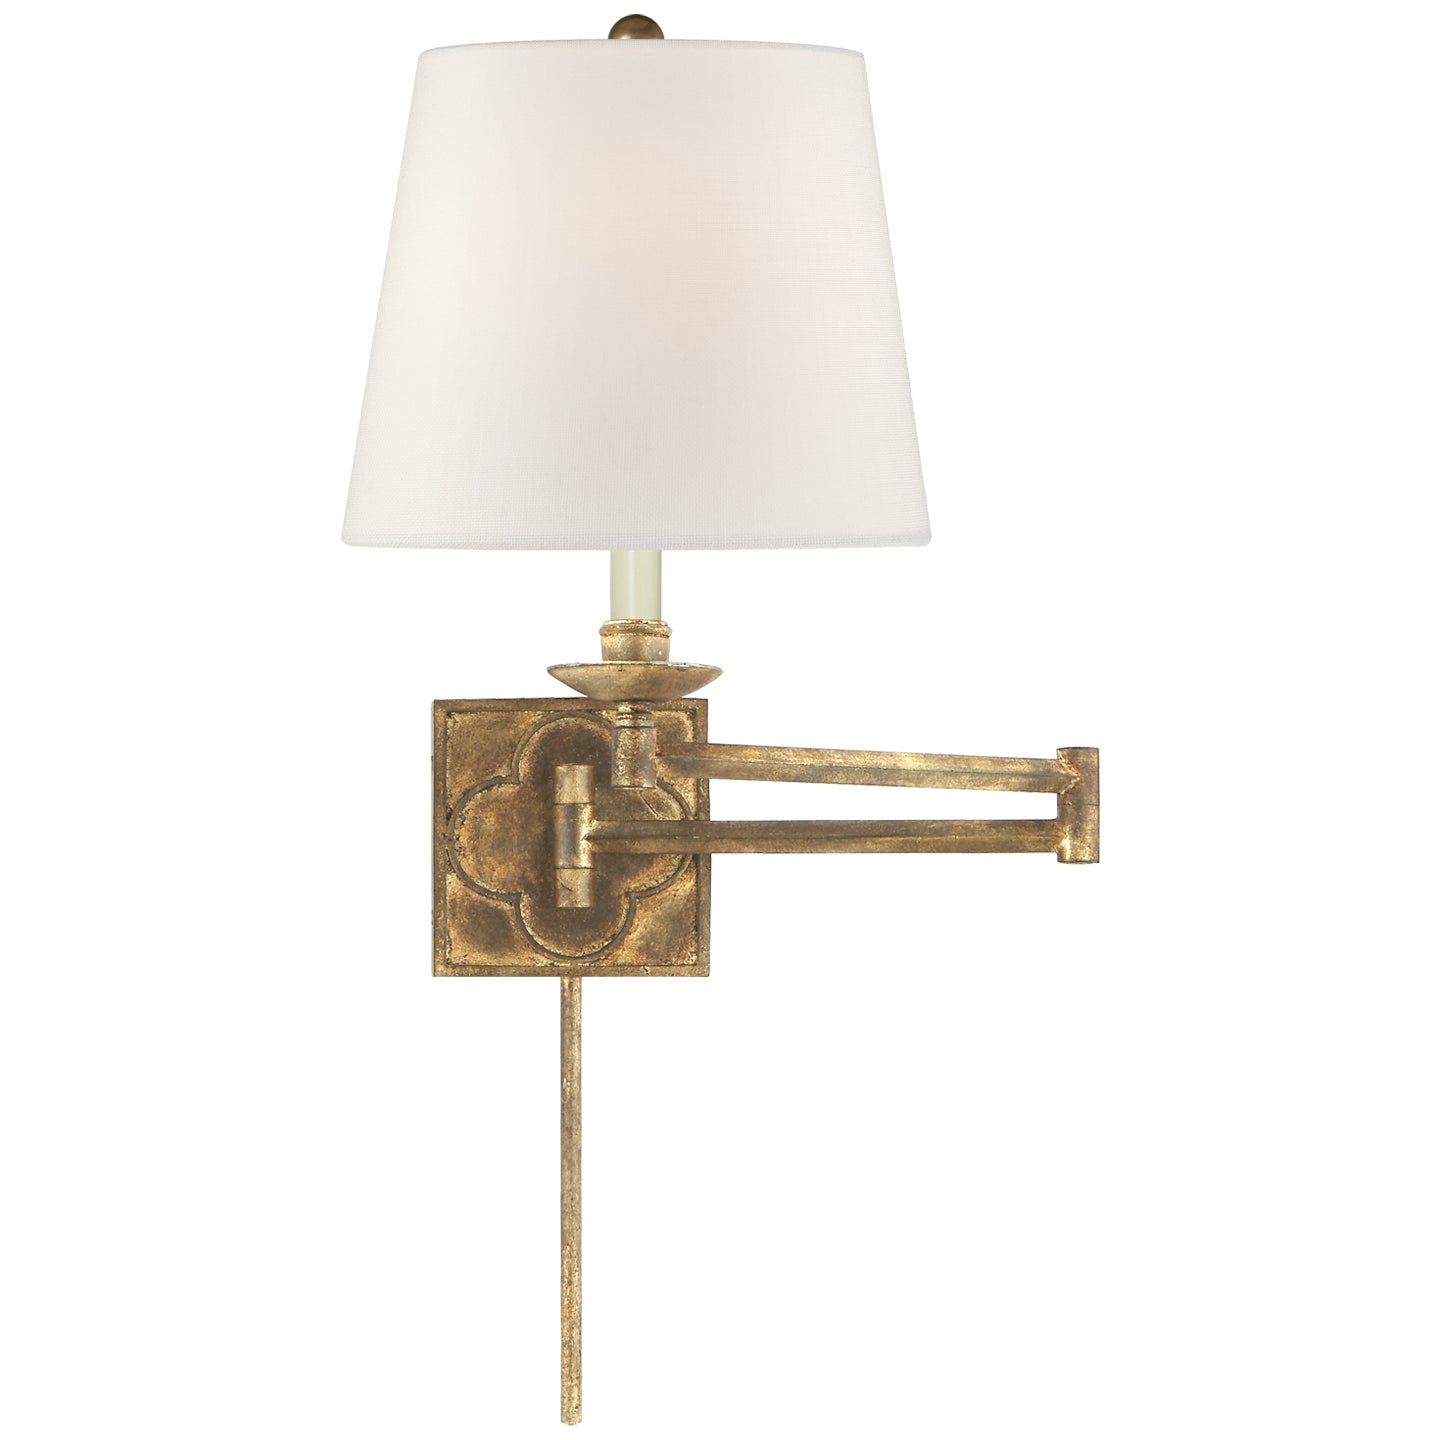 Visual Comfort Signature - SK 2109GI-L - One Light Wall Sconce - Griffith - Gilded Iron